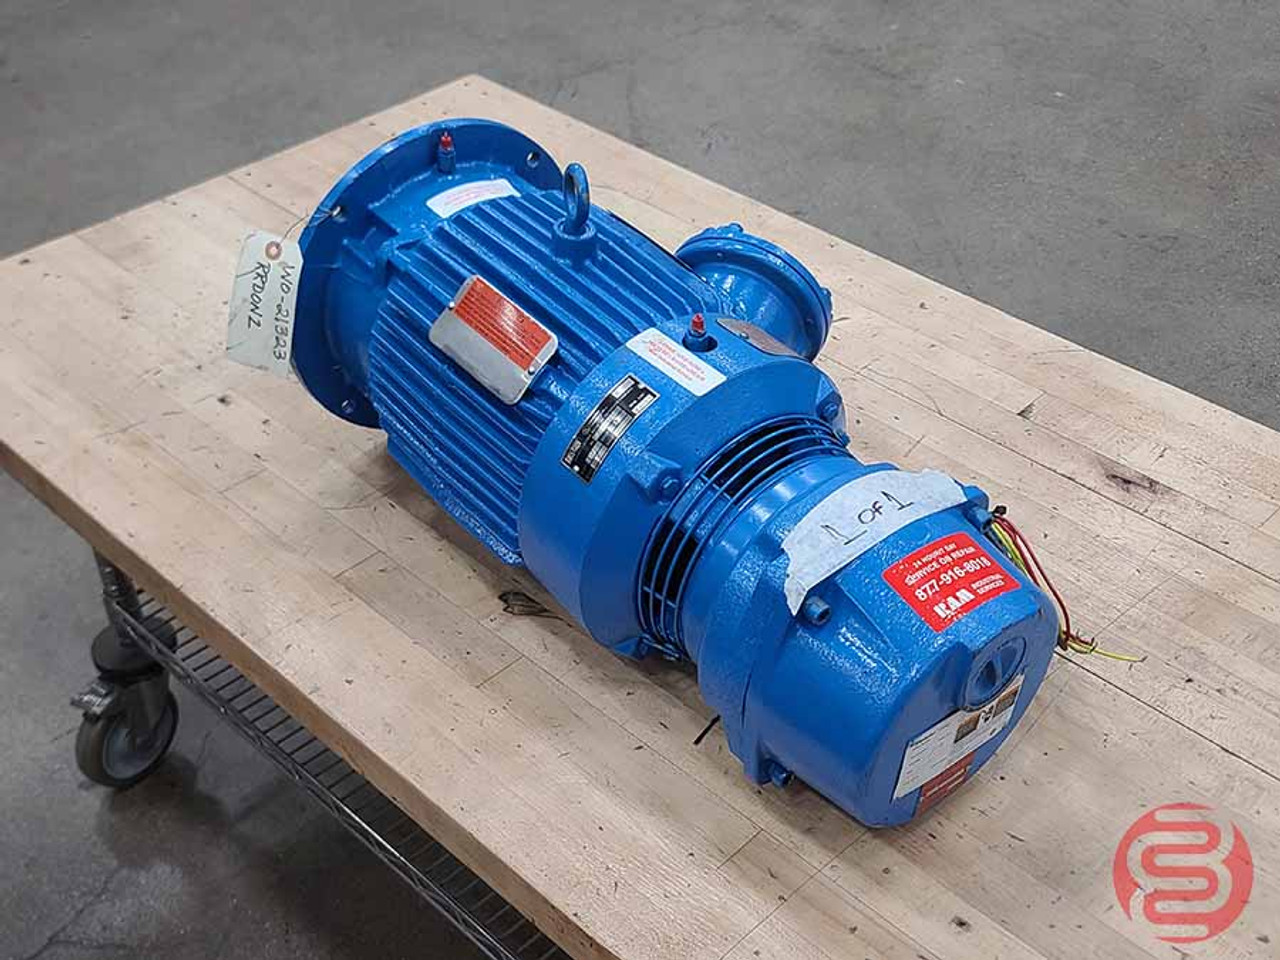 Reliance Electric Duty Master 2HP 460V 1160RPM 2.8A Motor L 184TD Frame